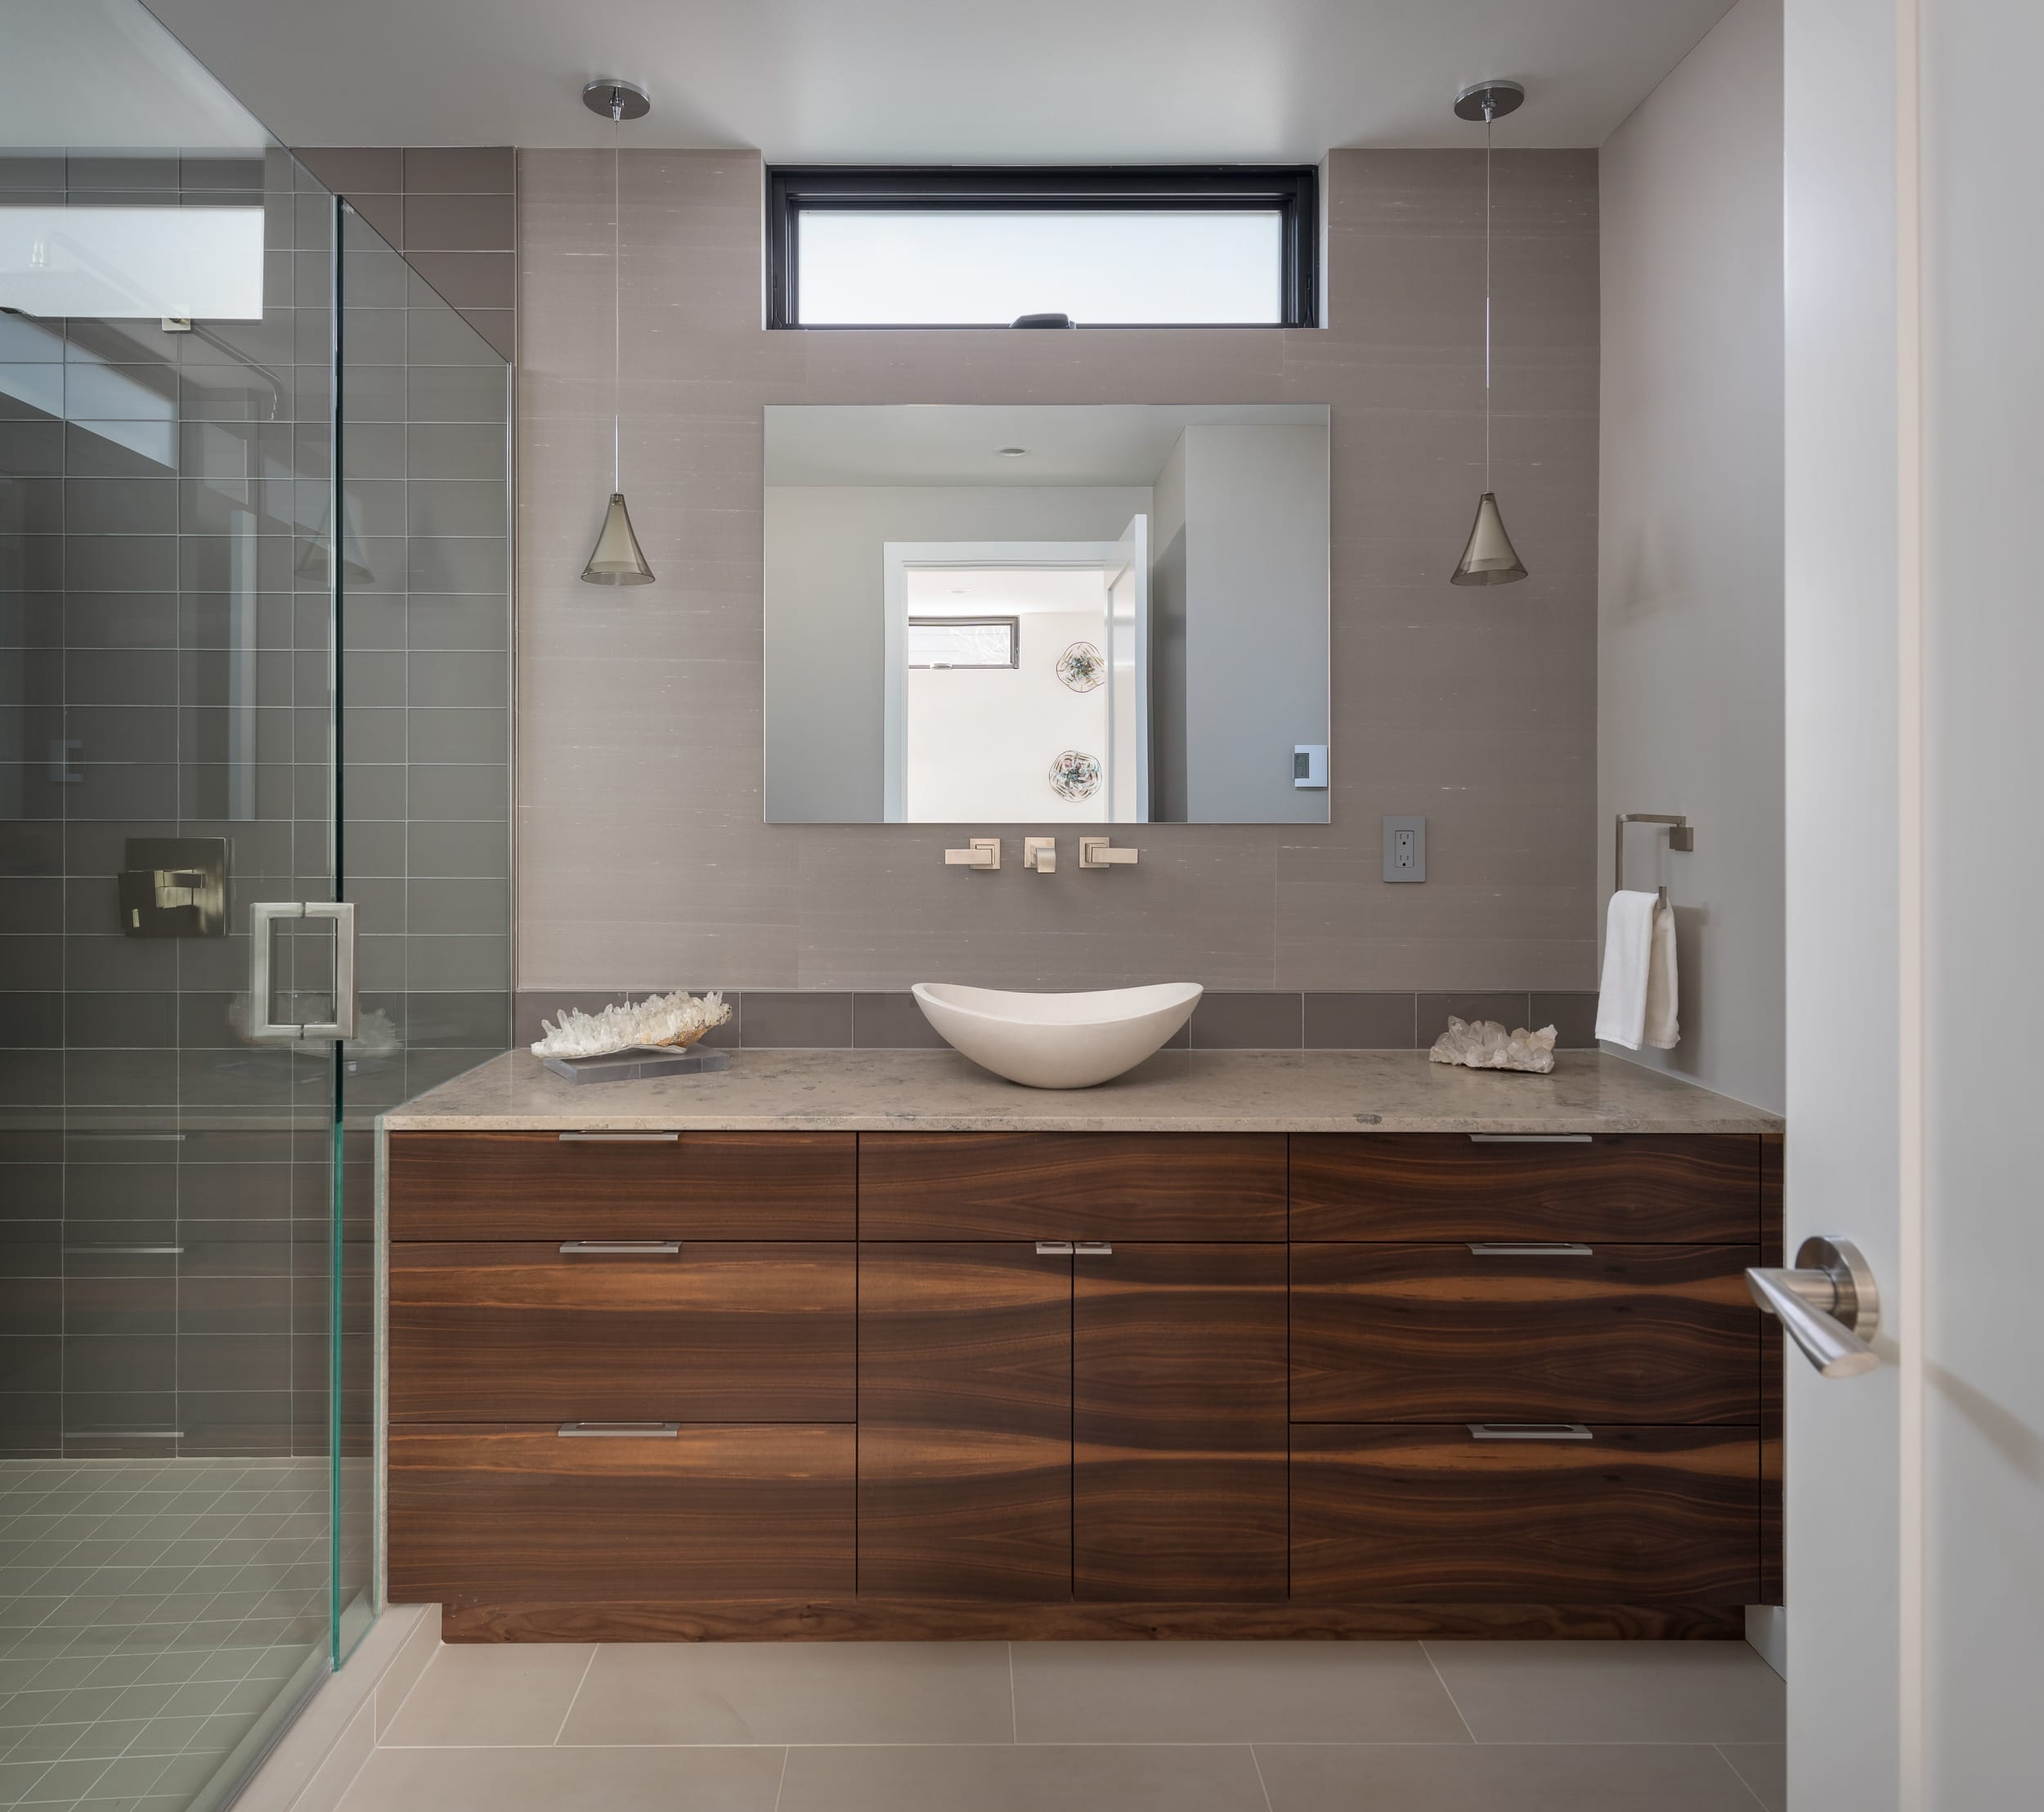 A modern bathroom with wooden cabinets and a glass shower, suitable for a modern home.